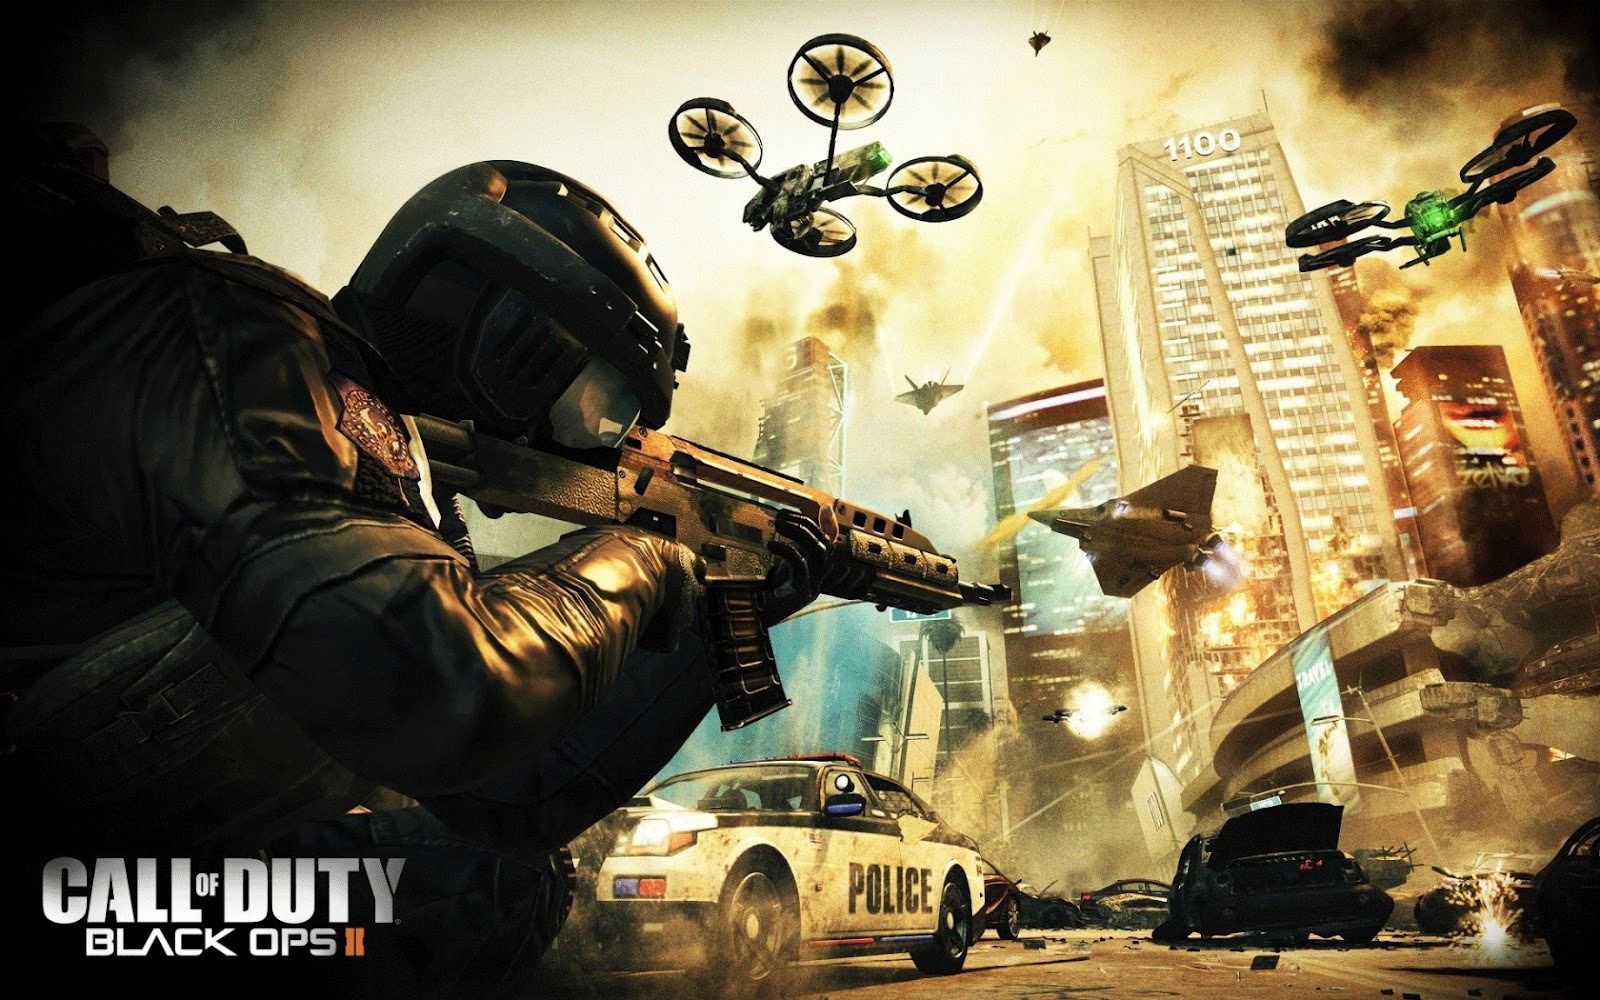 Call of Duty: Black Ops II Theme Download